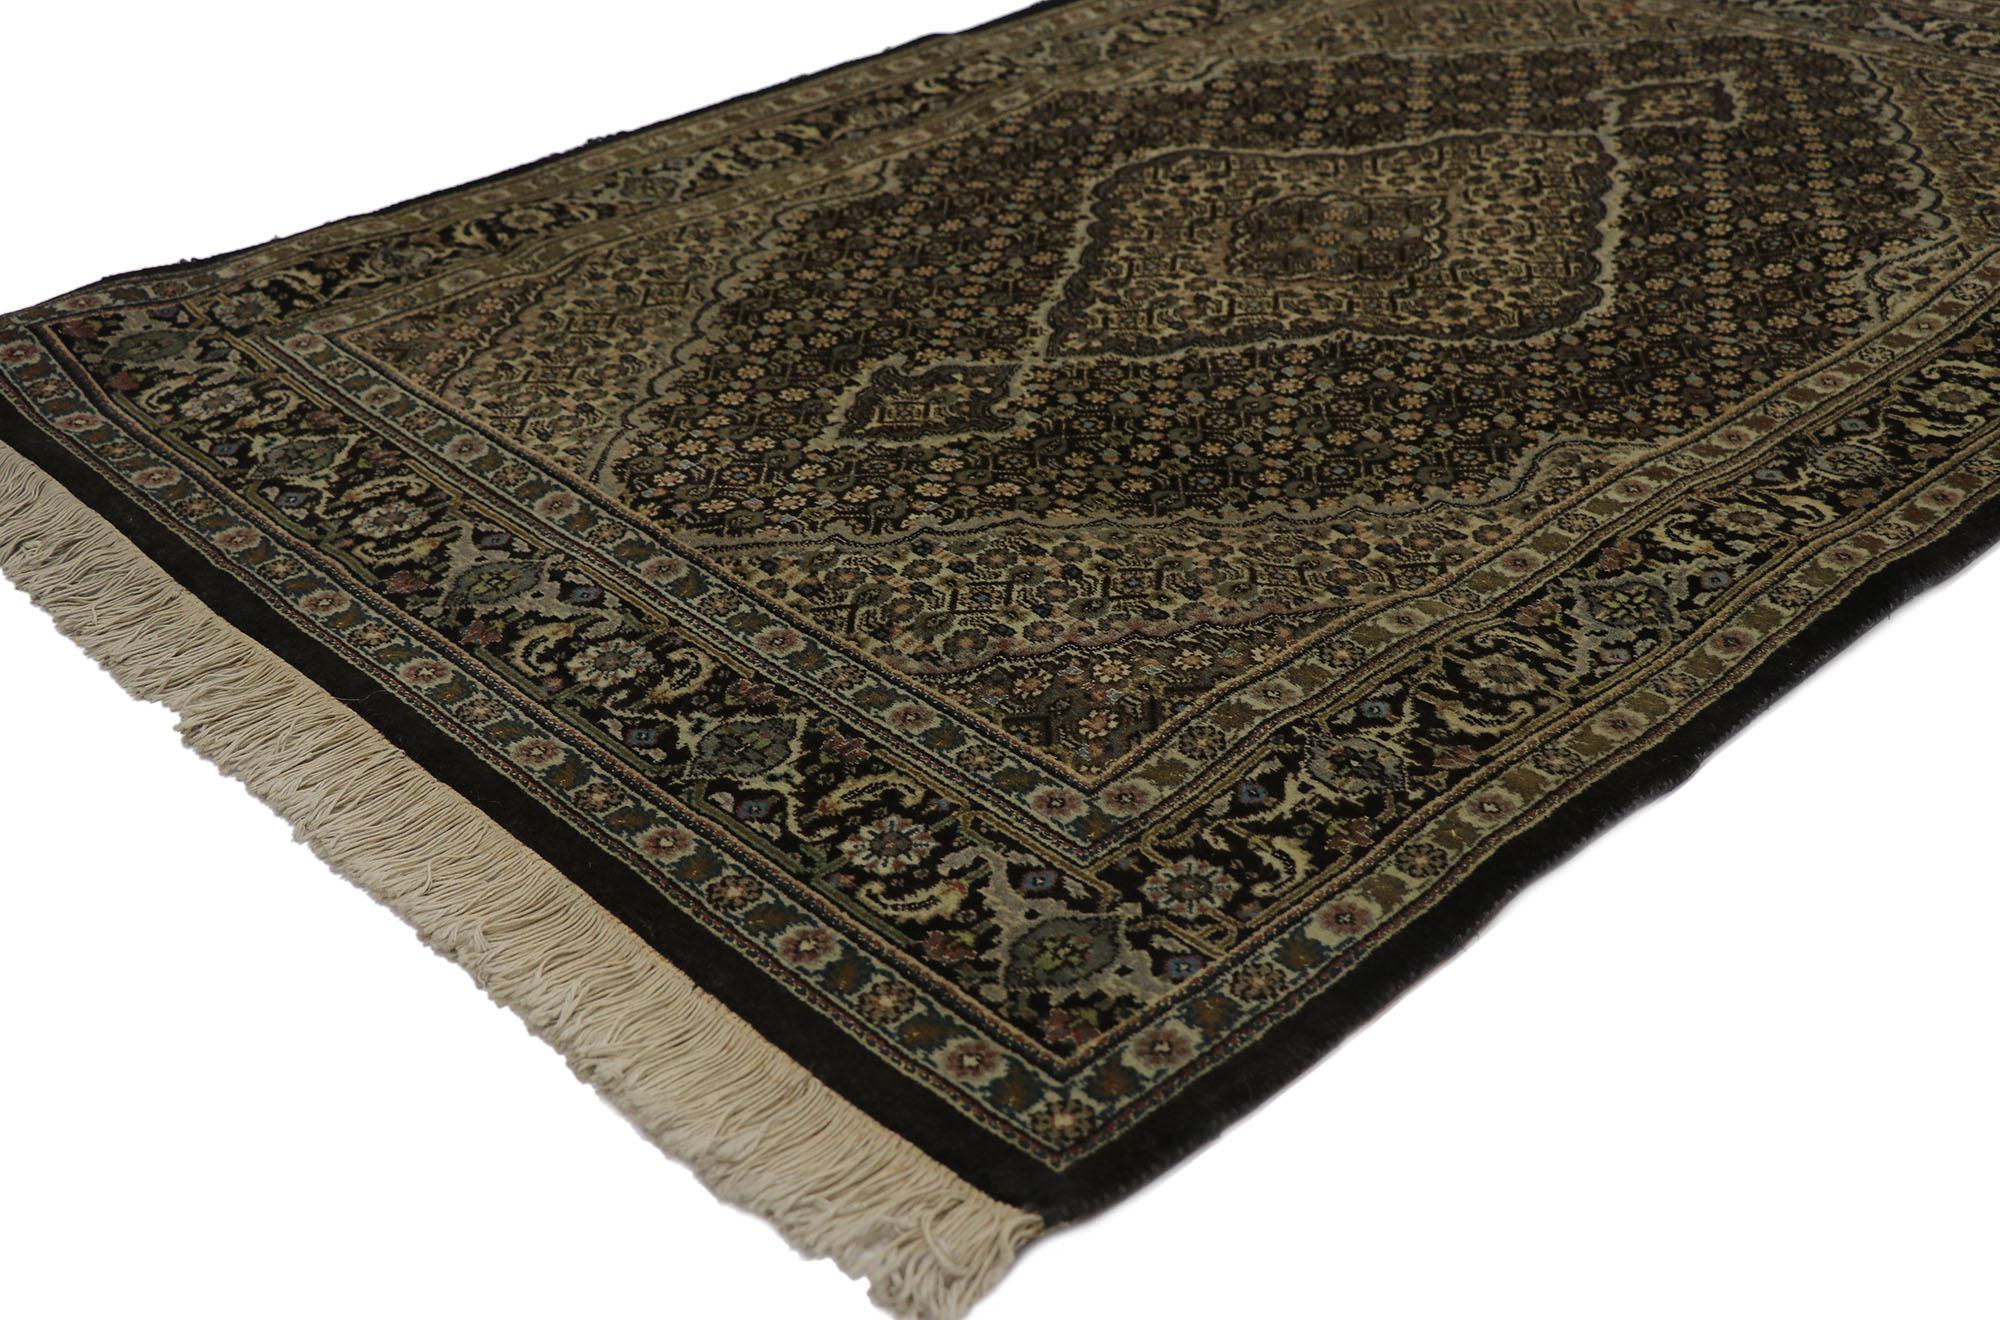 ?21695 Antique Persian Tabriz rug, 03'04 x 05'00. Emanating traditional style with incredible detail and texture, this hand knotted wool antique Persian Tabriz rug is a captivating vision of woven beauty. The traditional design and dark color